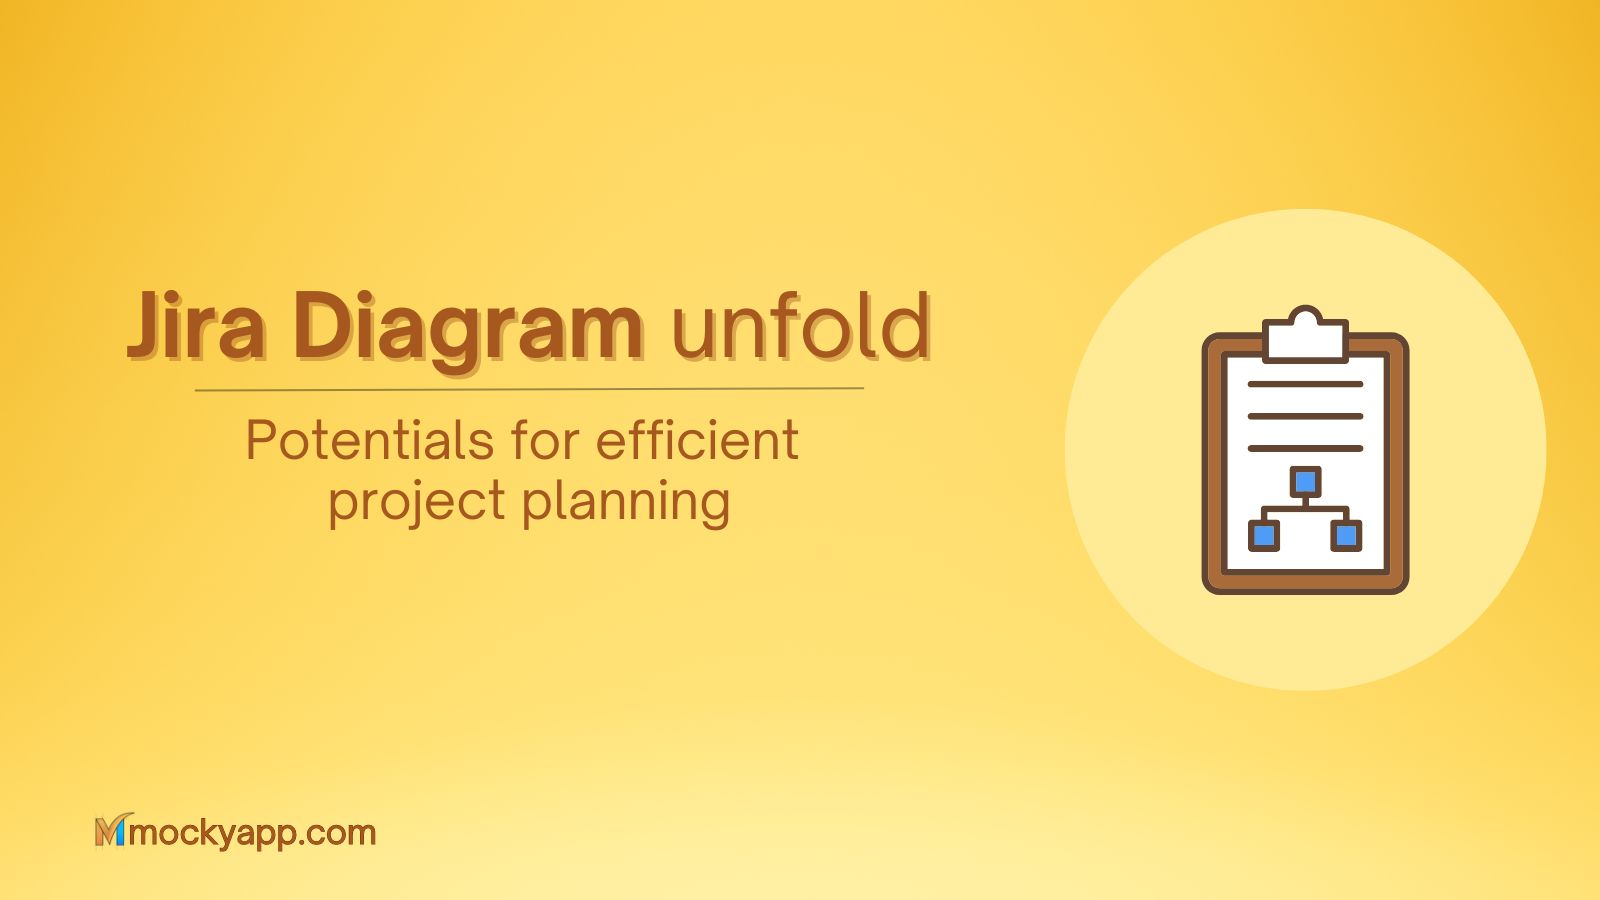 Jira Diagram: Potentials unfold for efficient project planning